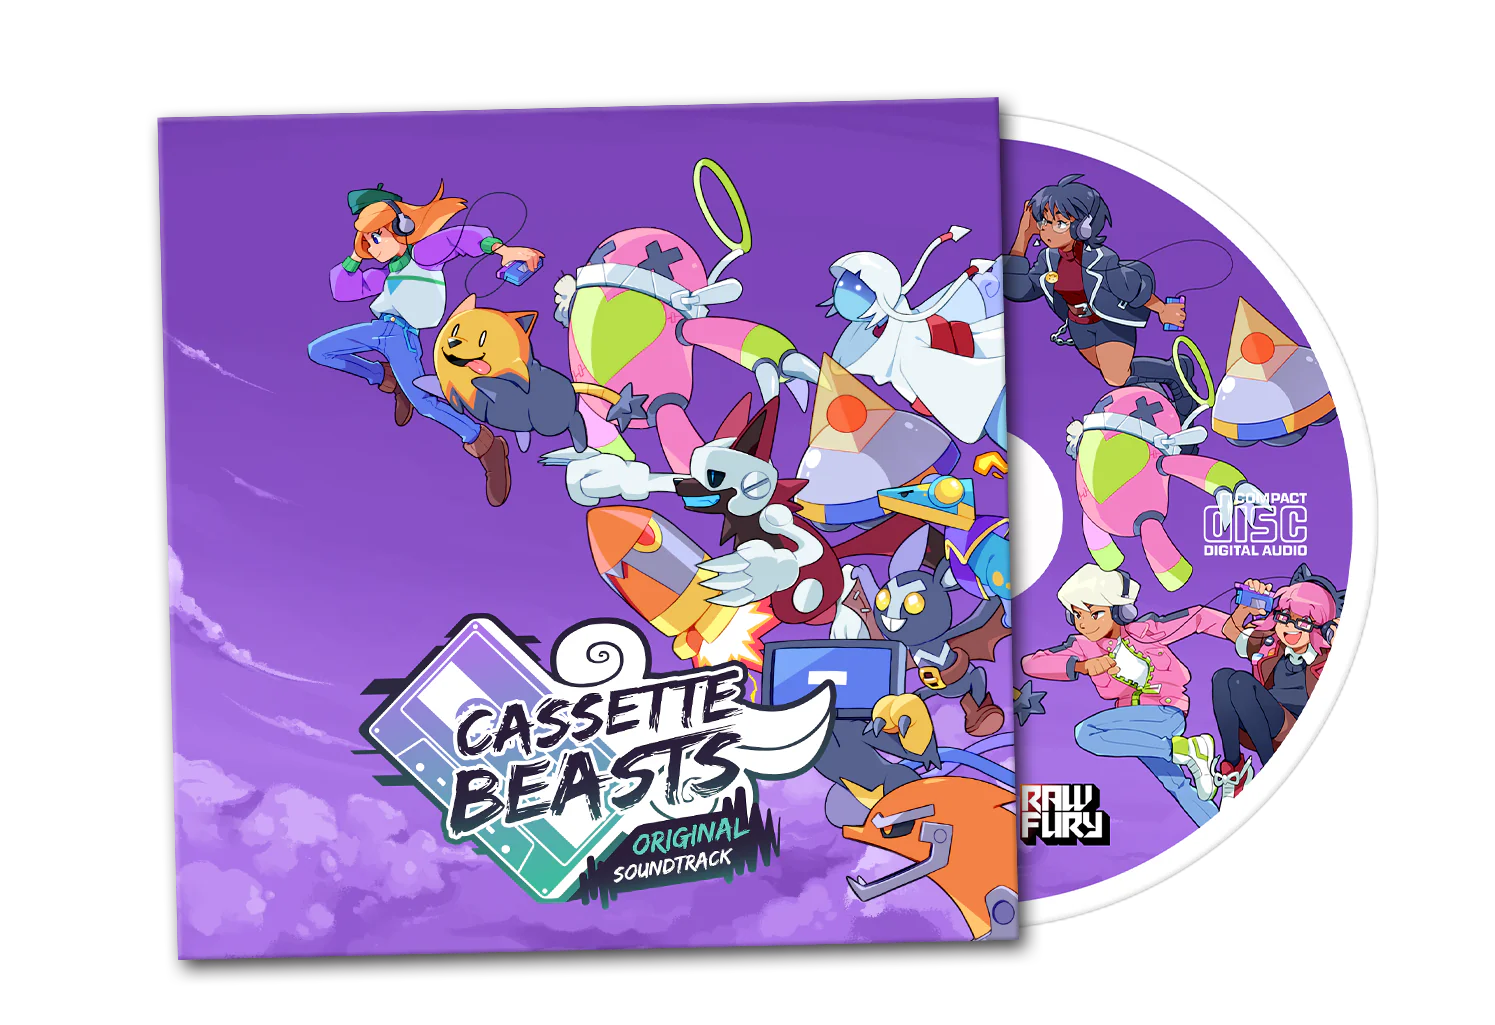 cassette-beasts-for-nintendo-switch-physical-release-announce-in-super-rare-games12